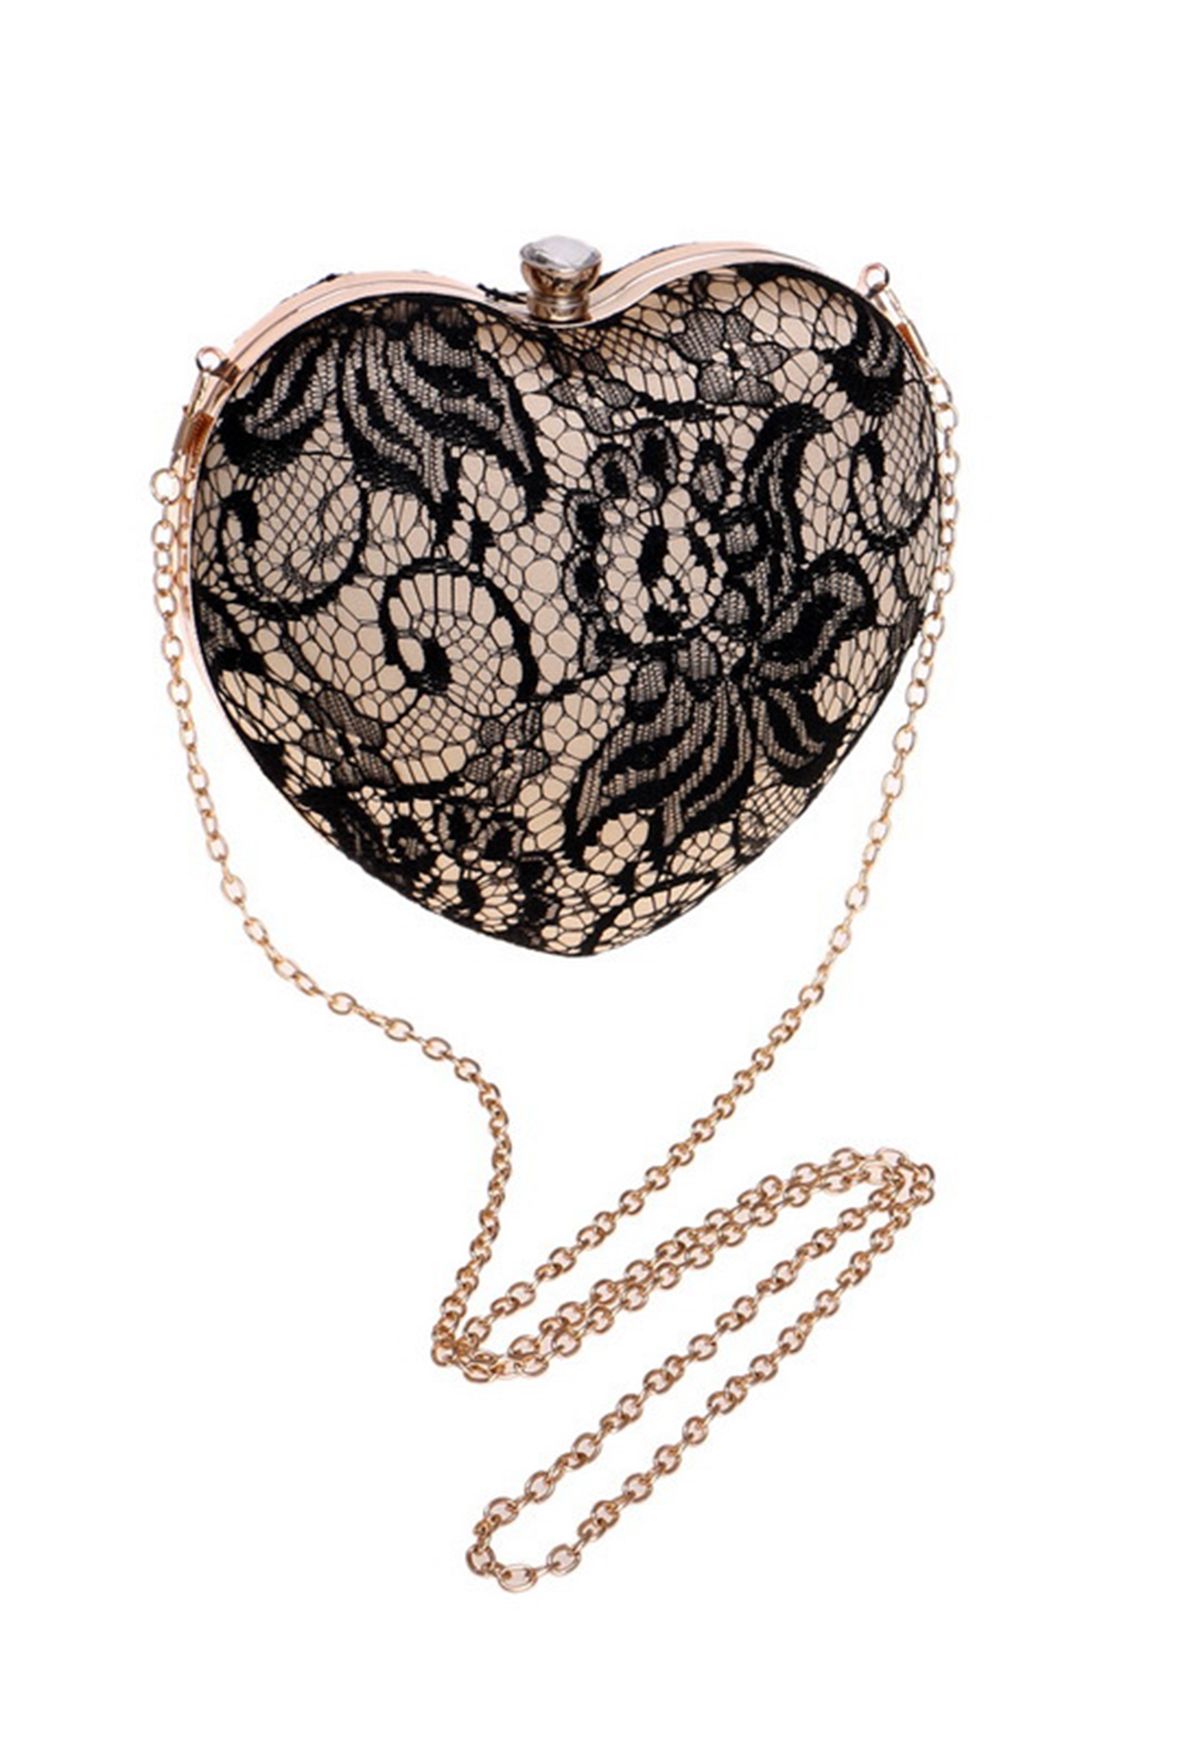 Mysterious Lace Heart Shape Clutch in Black